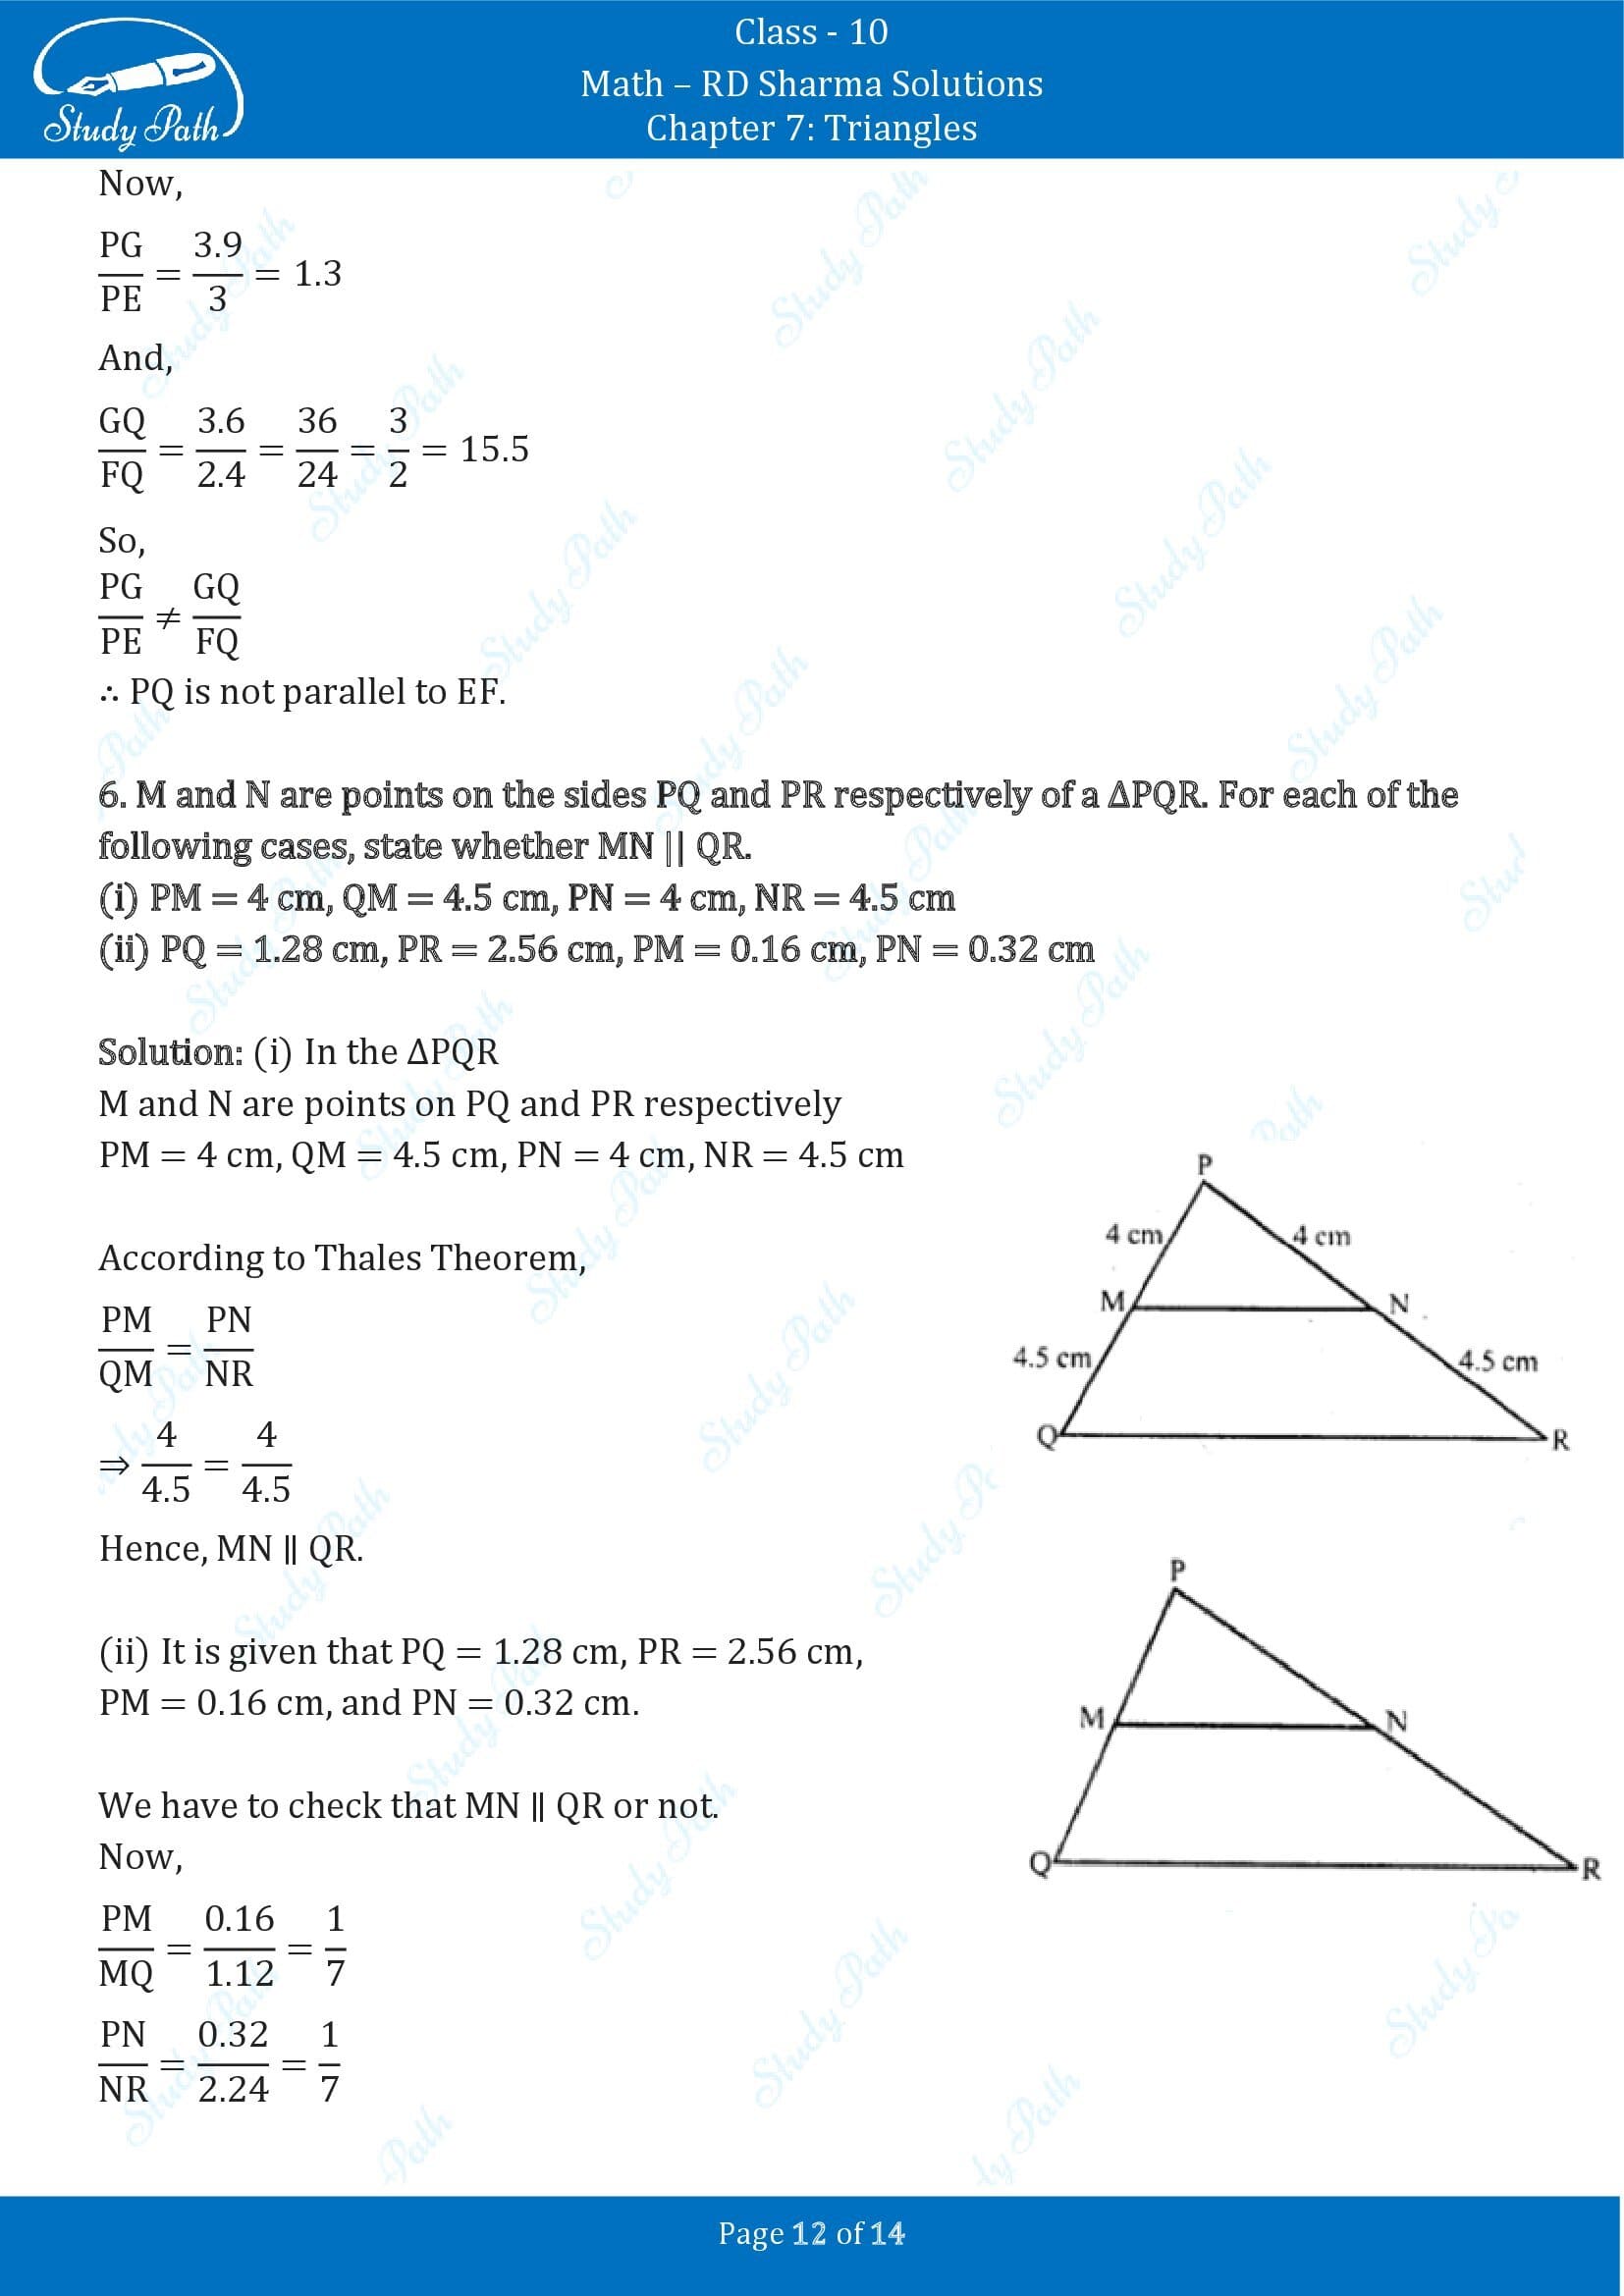 RD Sharma Solutions Class 10 Chapter 7 Triangles Exercise 7.2 00012